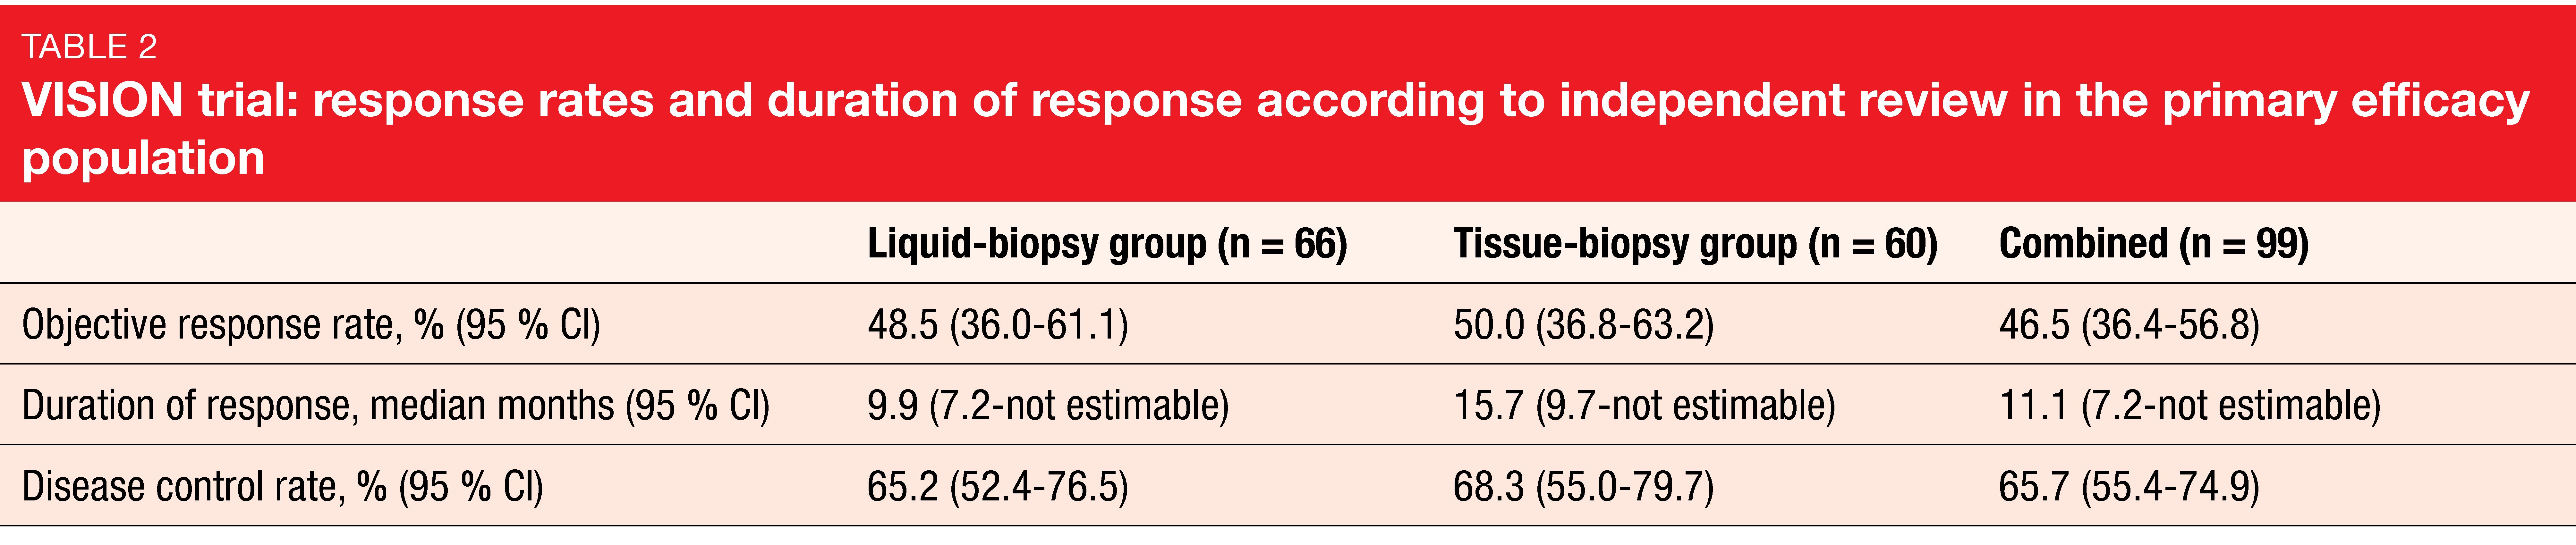 Table 2: VISION trial: response rates and duration of response according to independent review in the primary efficacy population